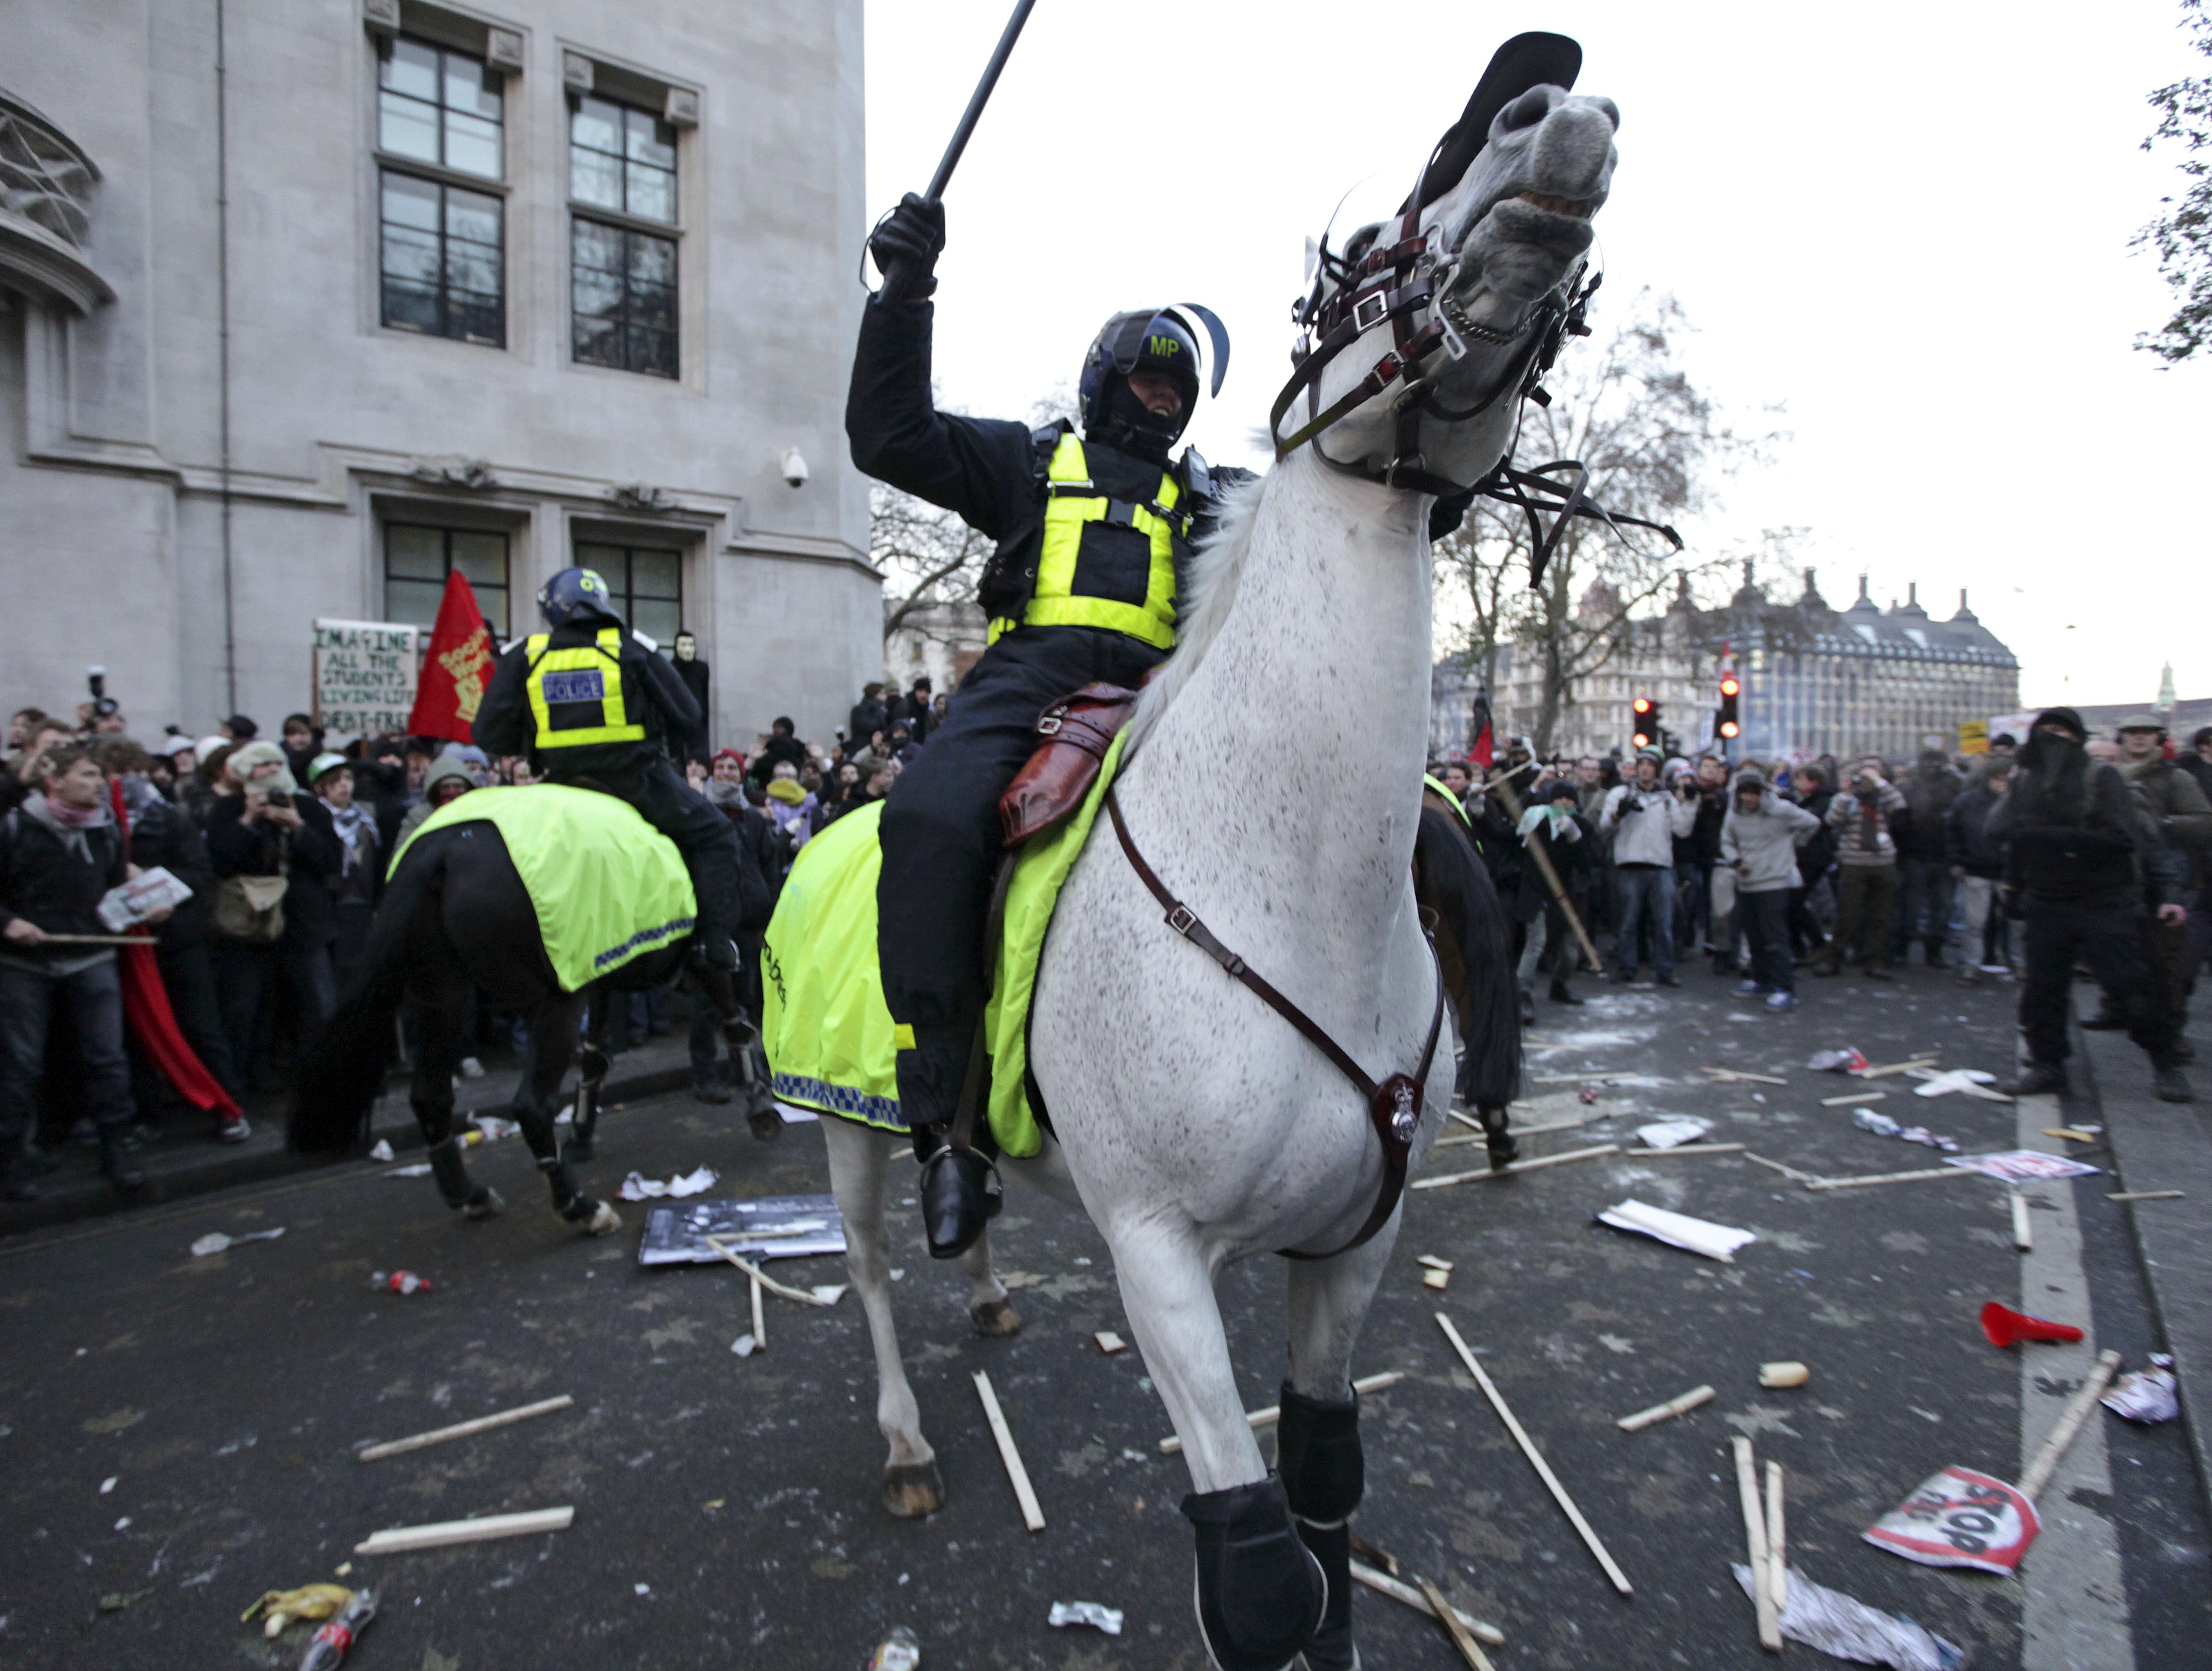 protest, Anarchy, March, Crowd, Police, Horse Wallpaper